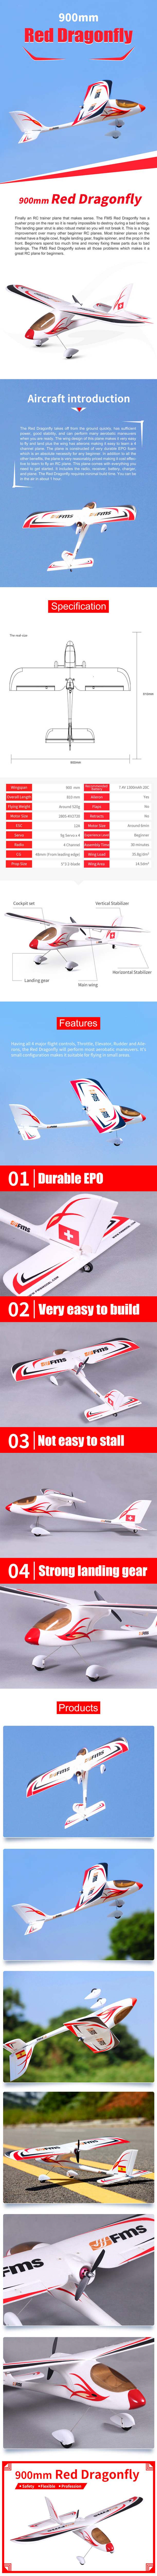 FMS-Red-Dragonfly-900mm-Wingspan-EPO-3D-Aerobatic-RC-Airplane-Trainer-Beginner-PNP-1691138-1